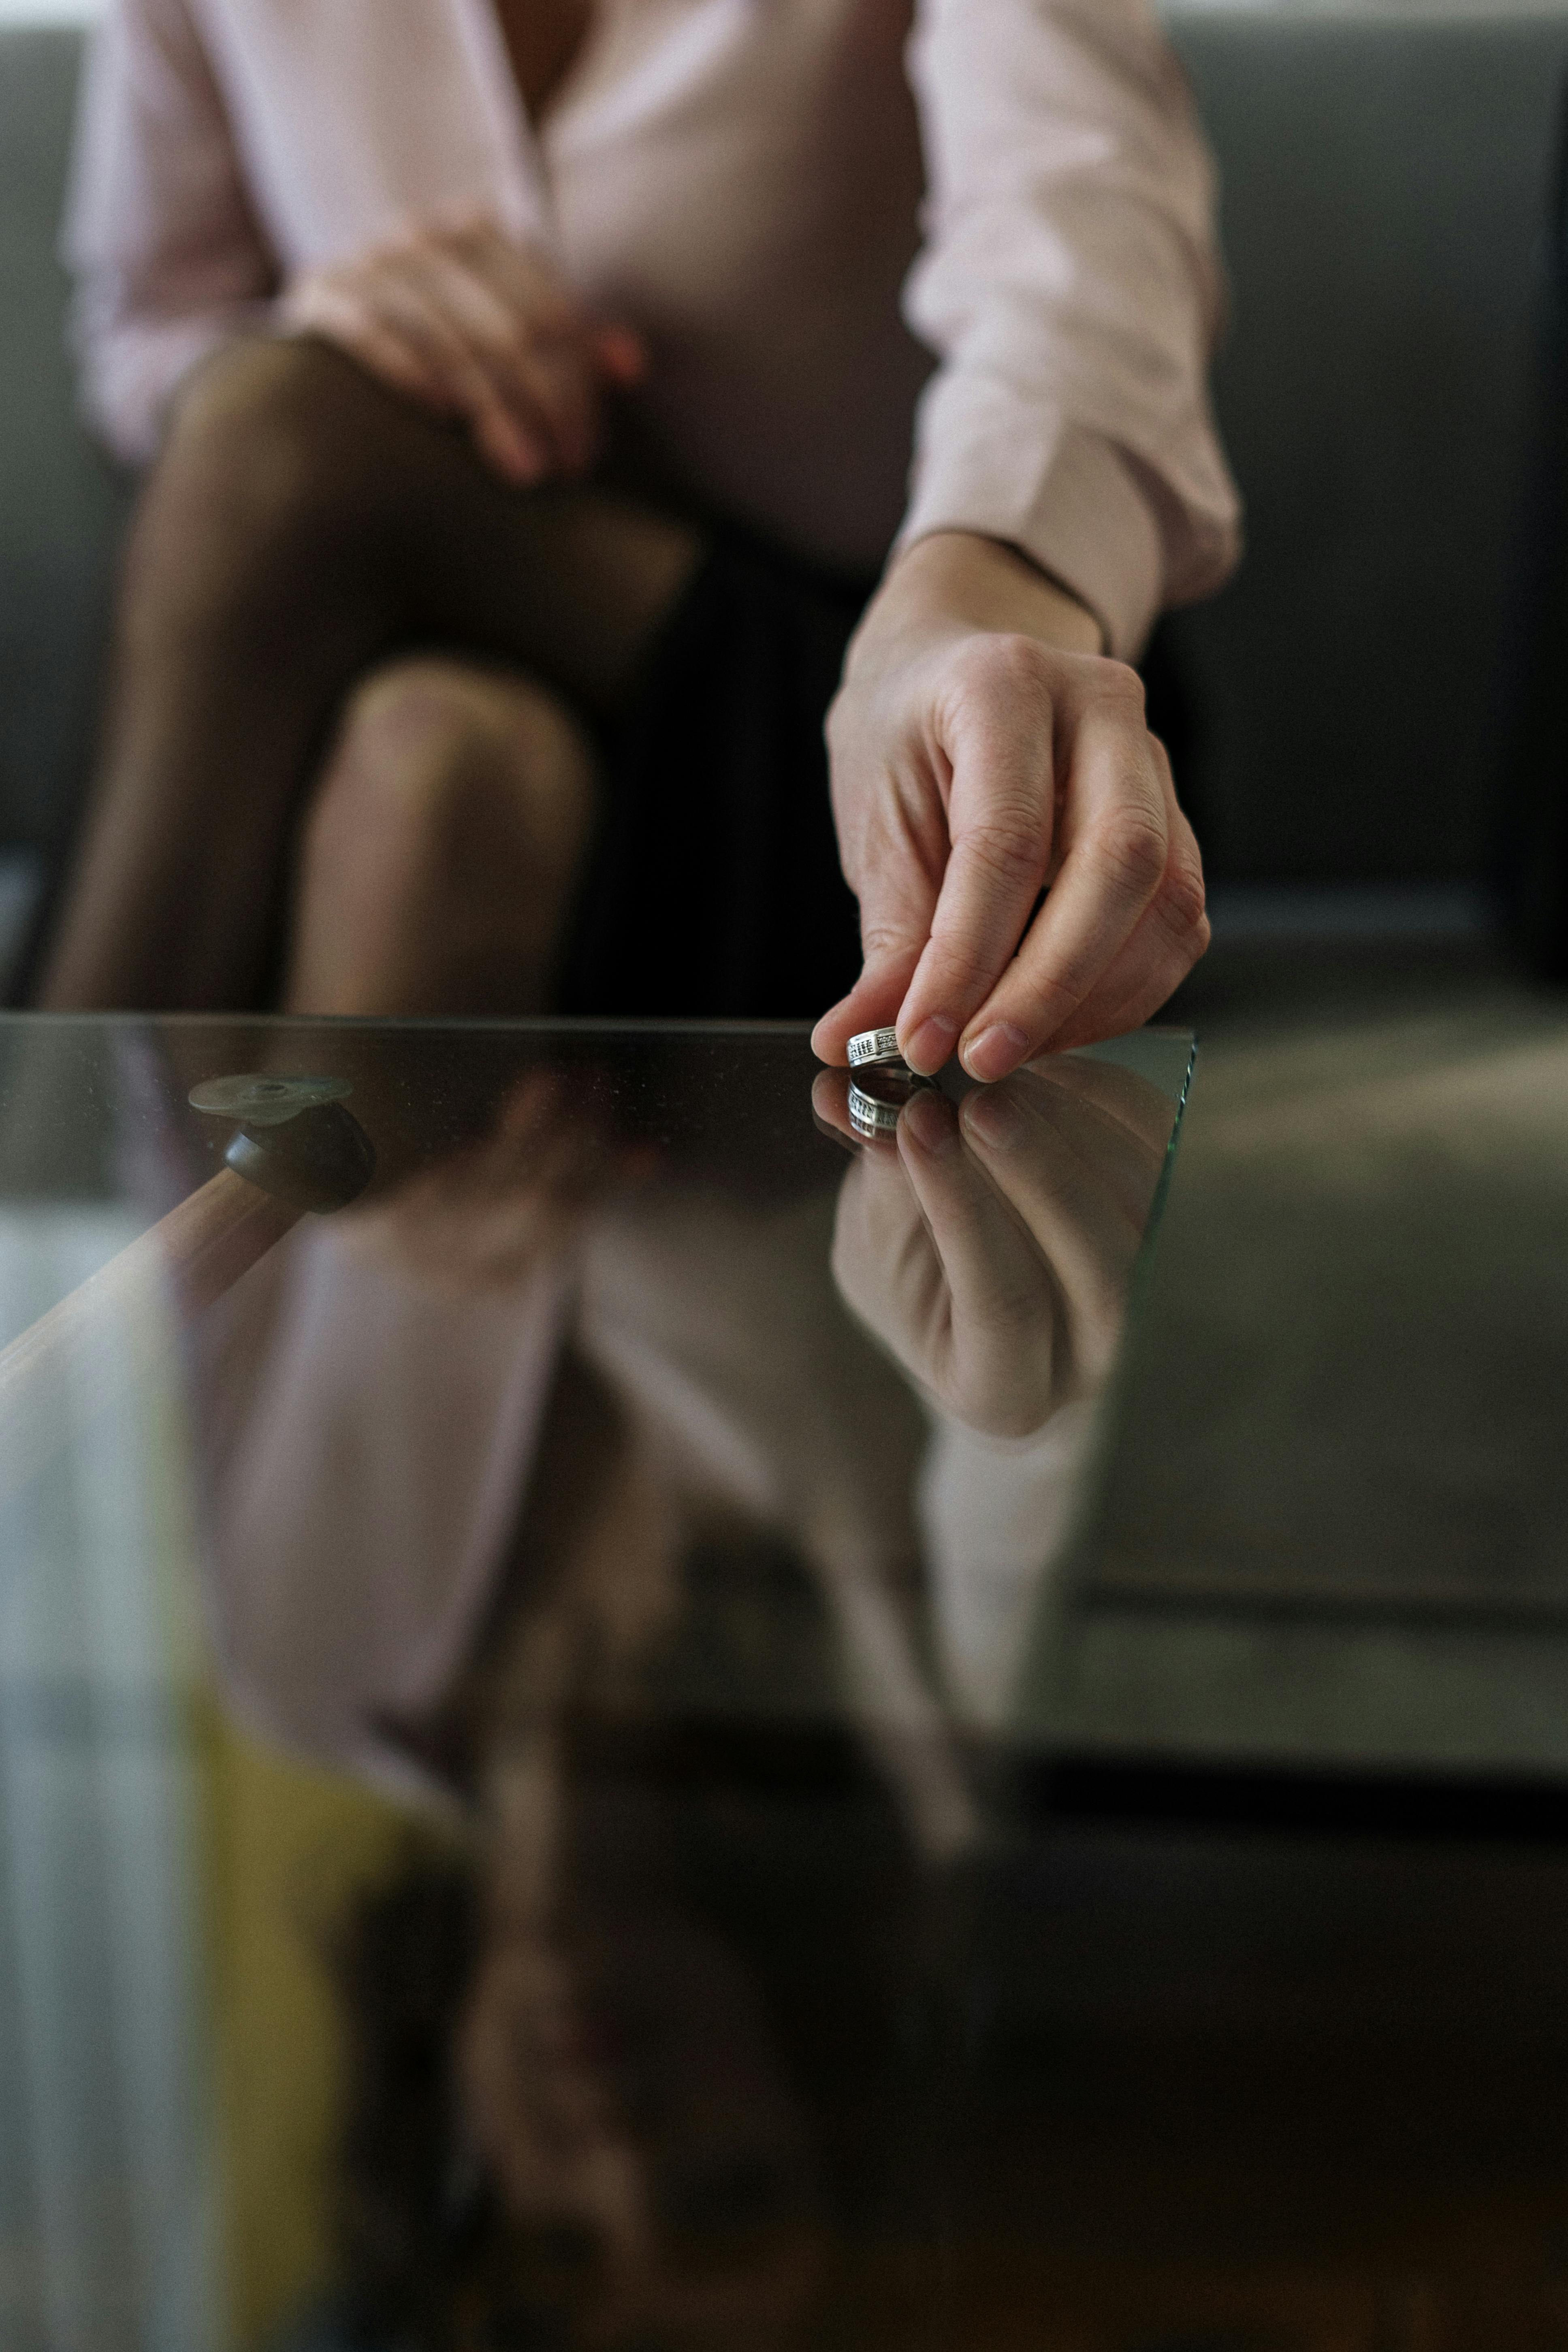 Woman leaving ring on the table | Source: Pexels